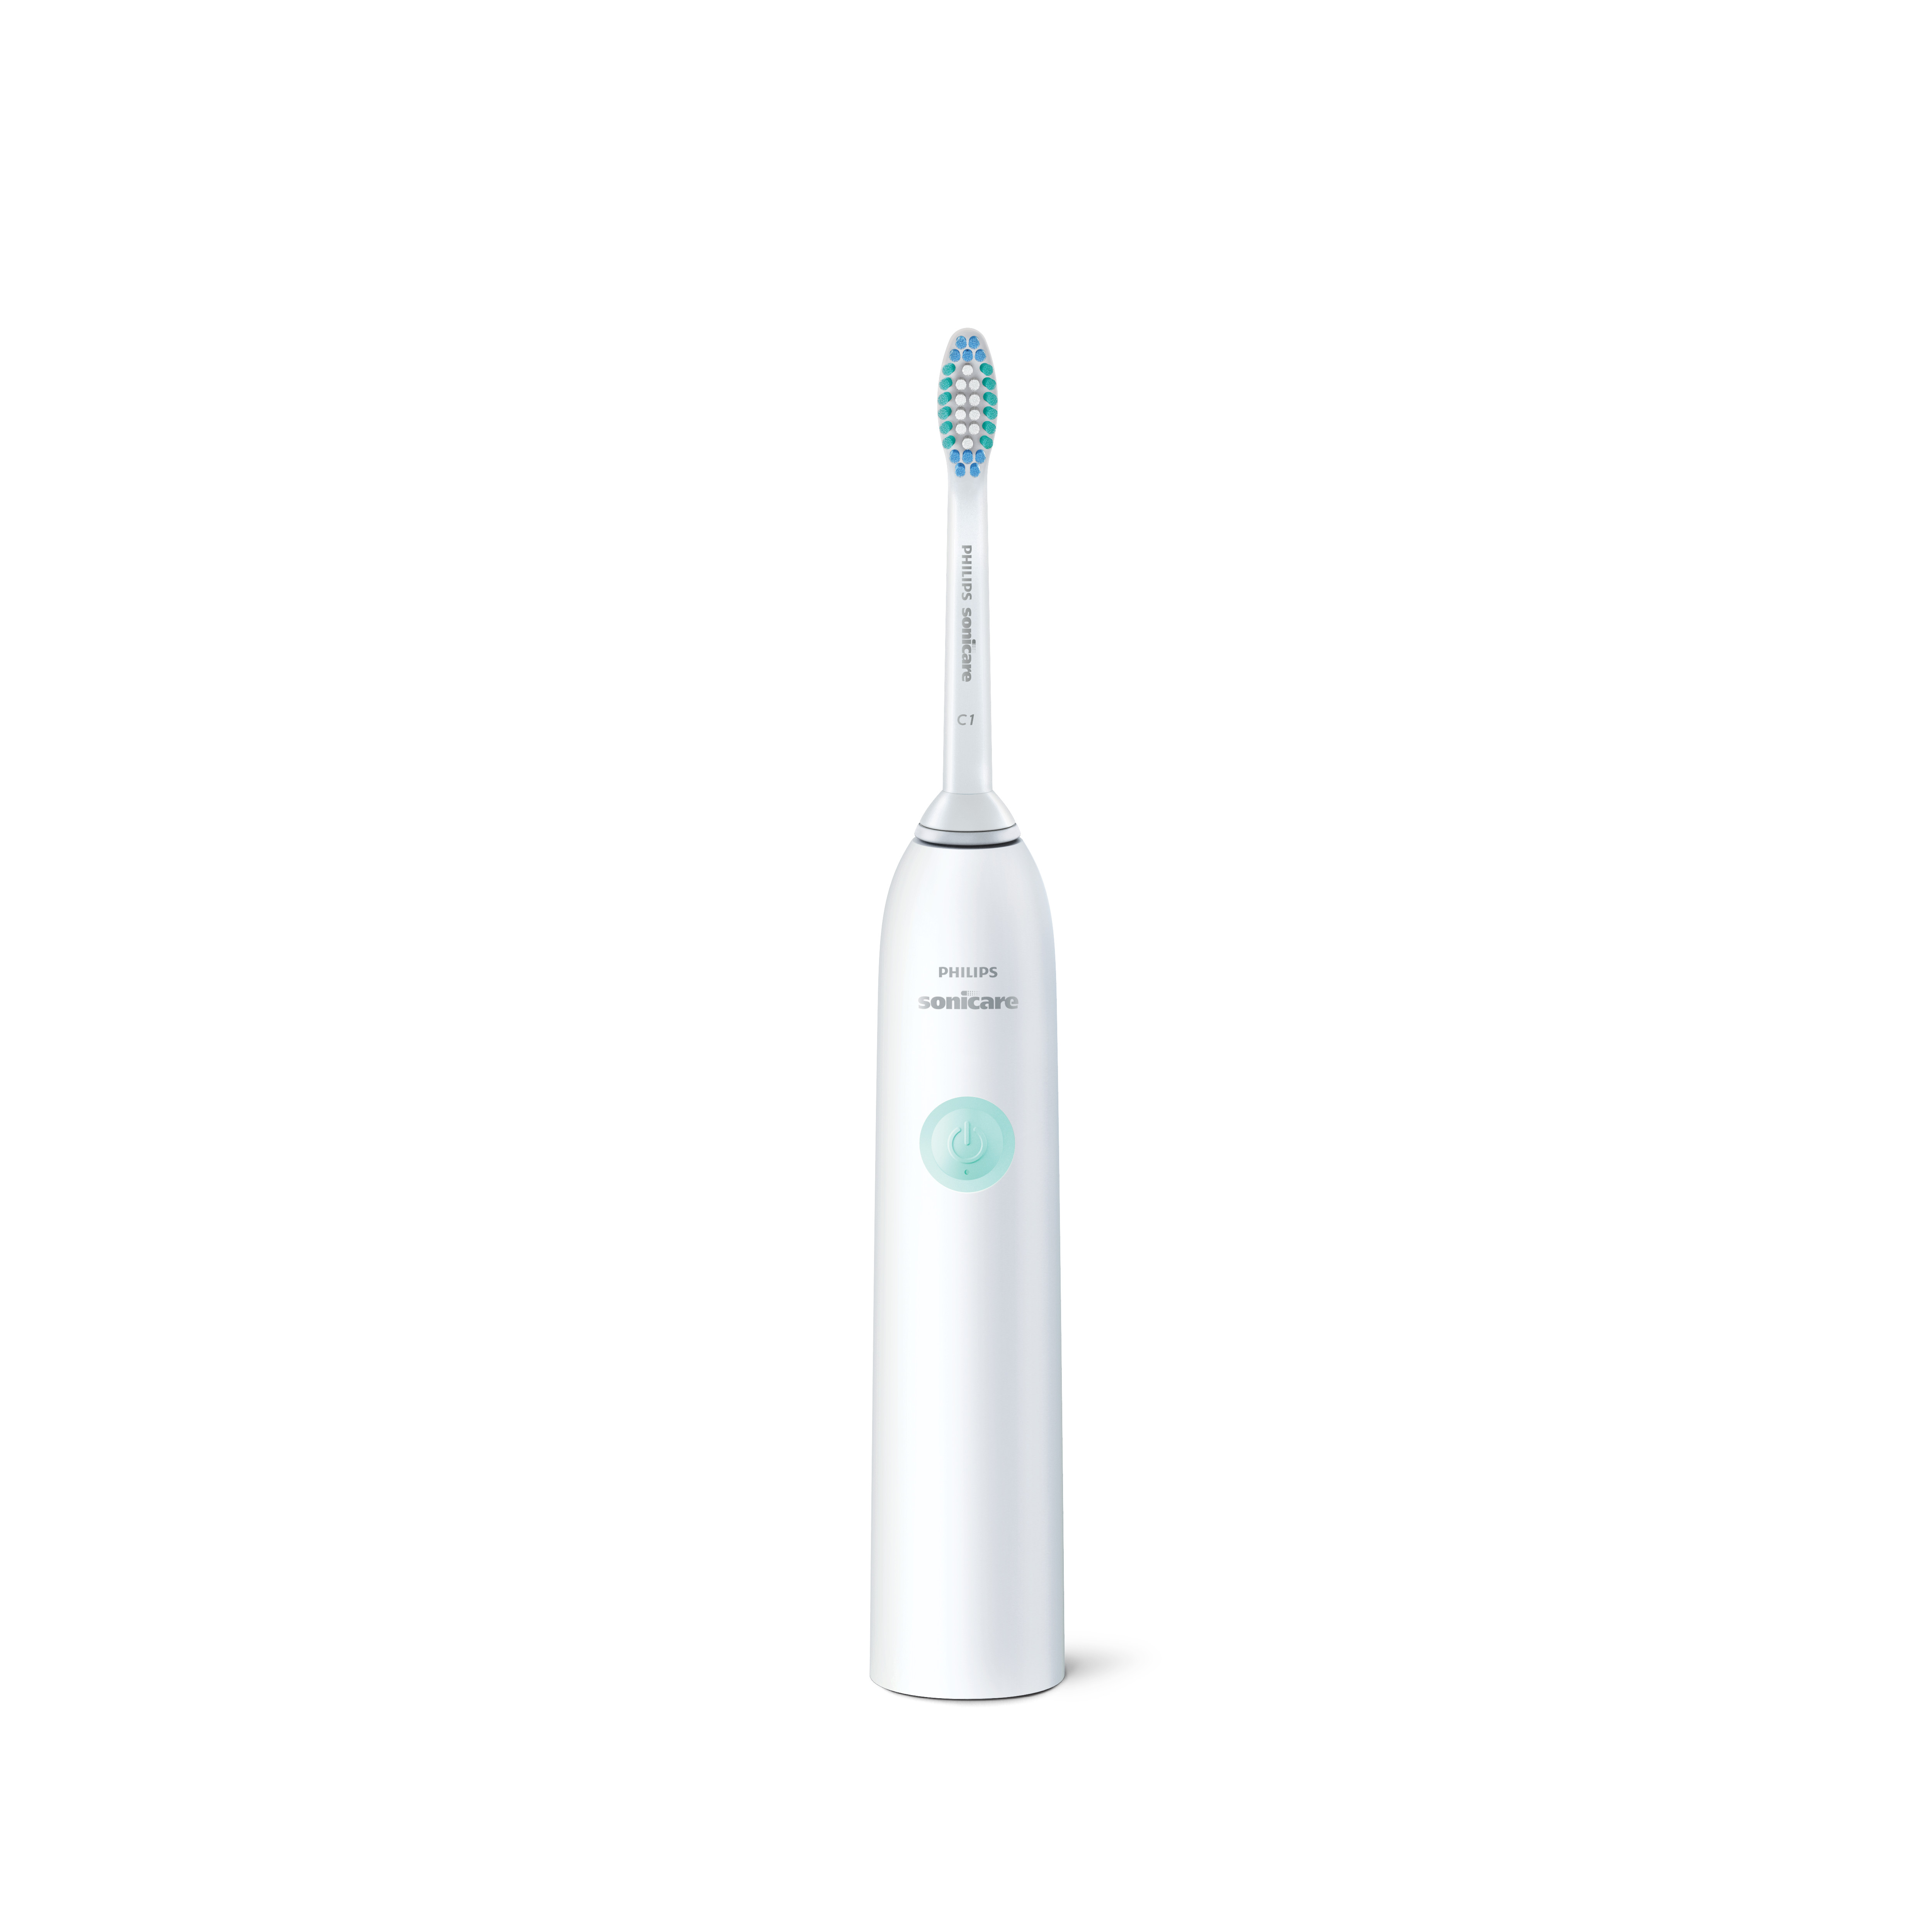 Philips Sonicare Dailyclean 1100 Rechargeable Electric Toothbrush, White HX3411/05 - image 3 of 10